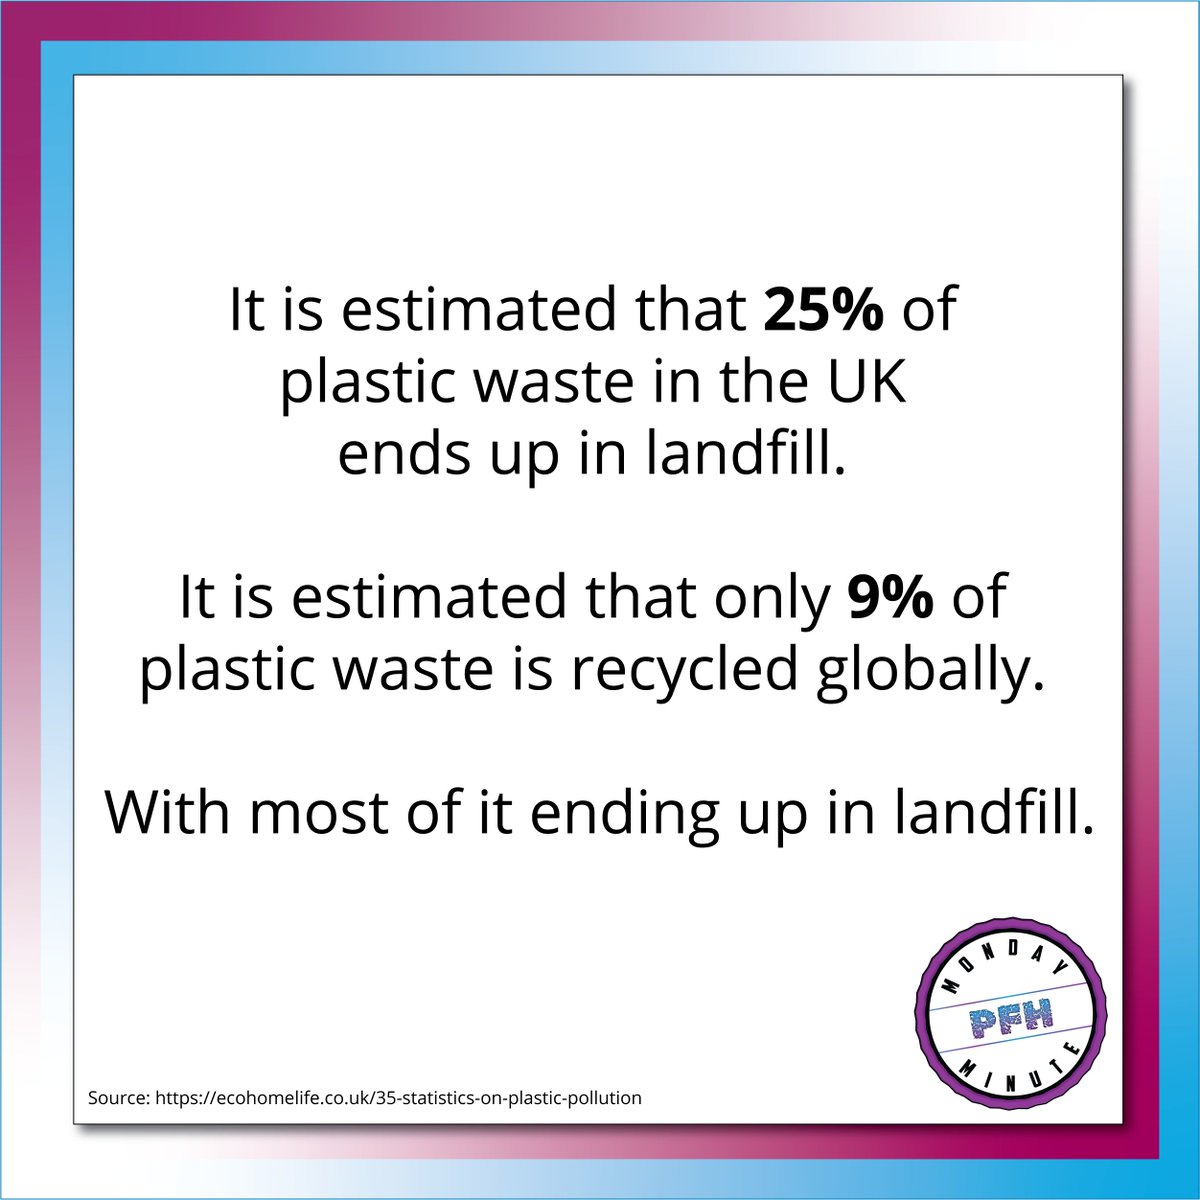 It is estimated that 25% of plastic waste in the UK ends up in landfill. It is estimated that only 9% of plastic waste is recycled globally. With most of it ending up in landfill.